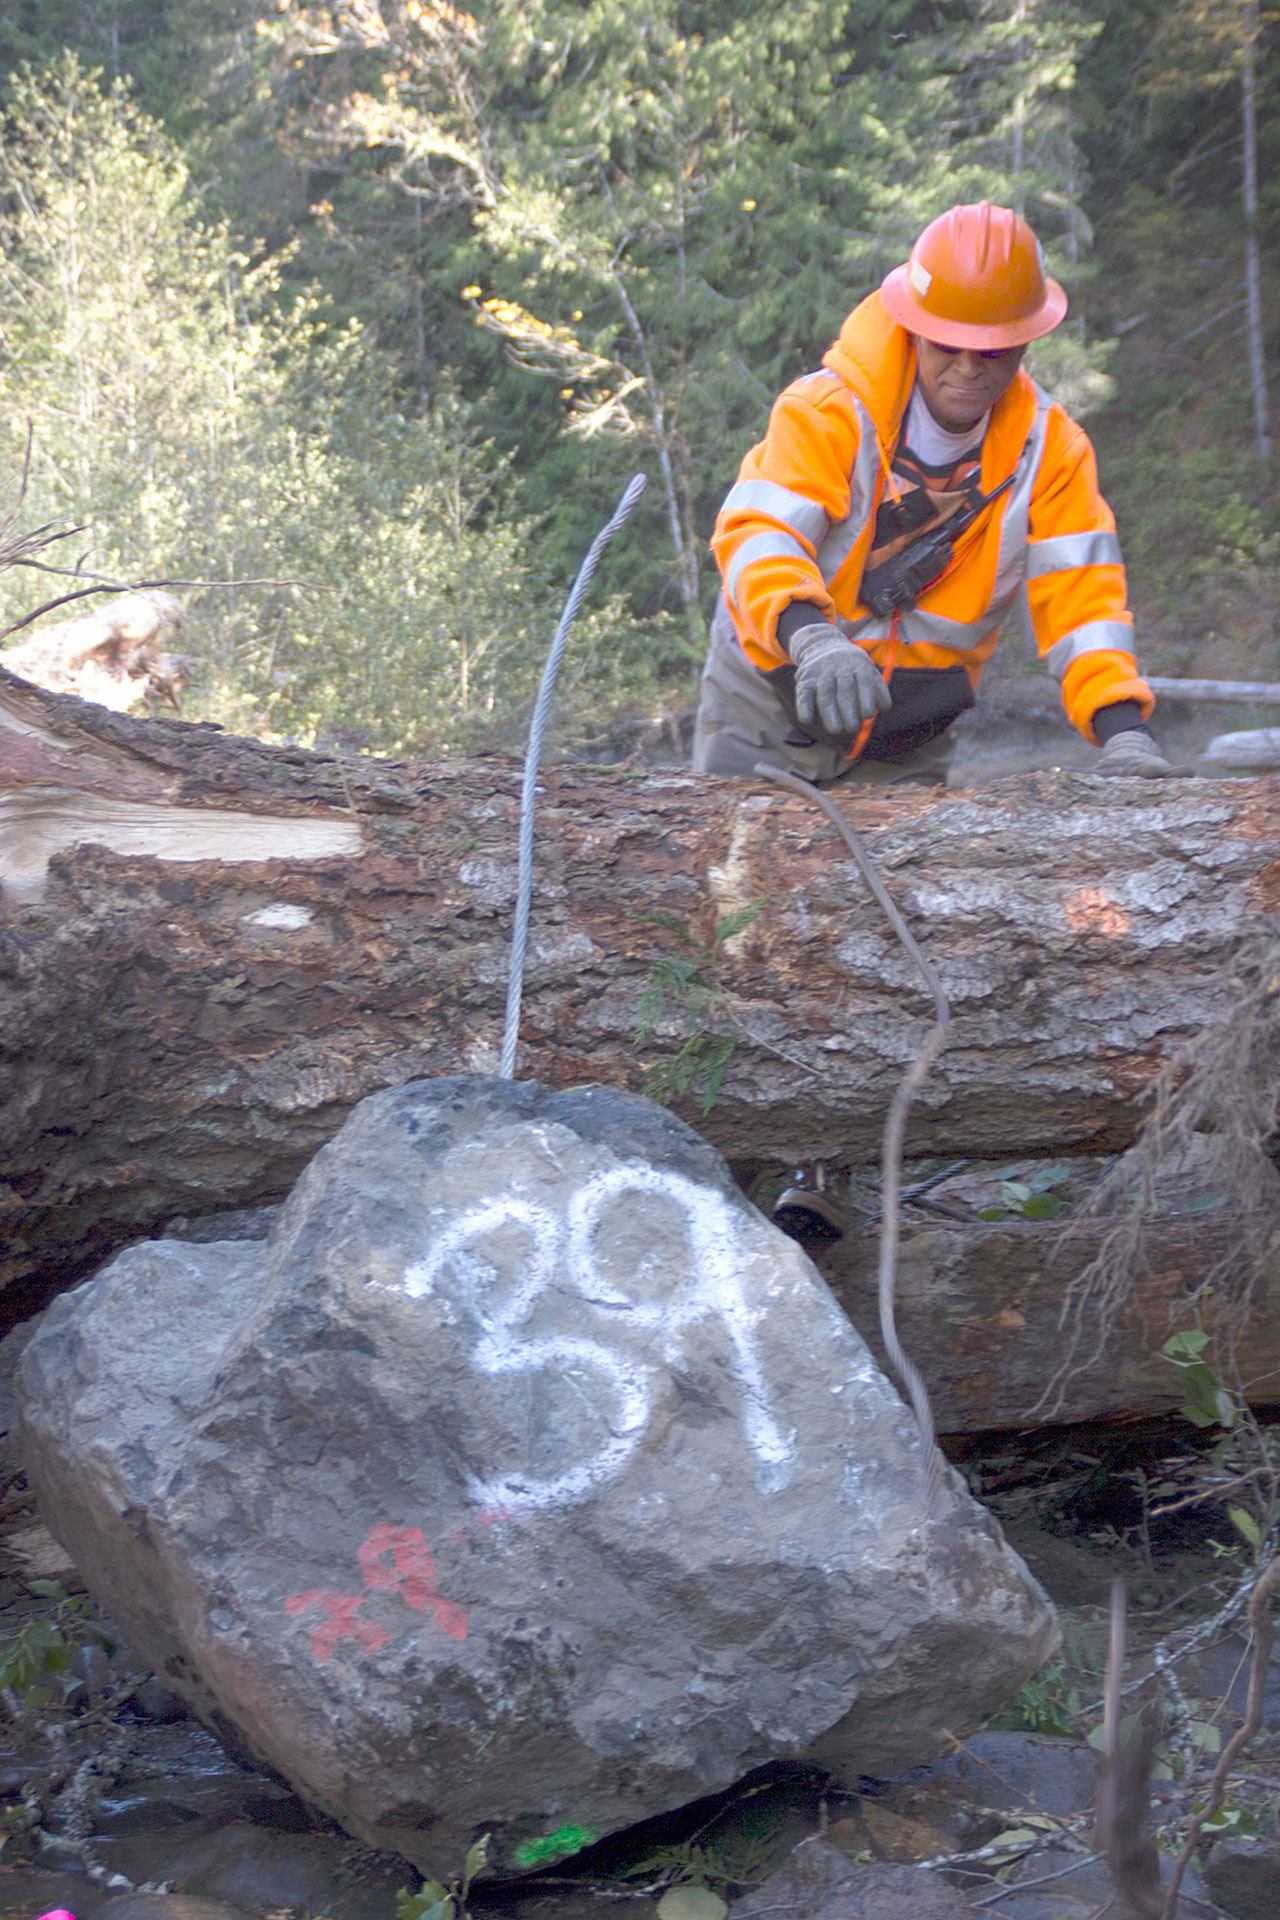 Jamestown S’Klallam Tribe biologists use rocks to anchor structures made out of logs with rootwads in the Gray Wolf River. (Tiffany Royal/Northwest Indian Fisheries Commission)